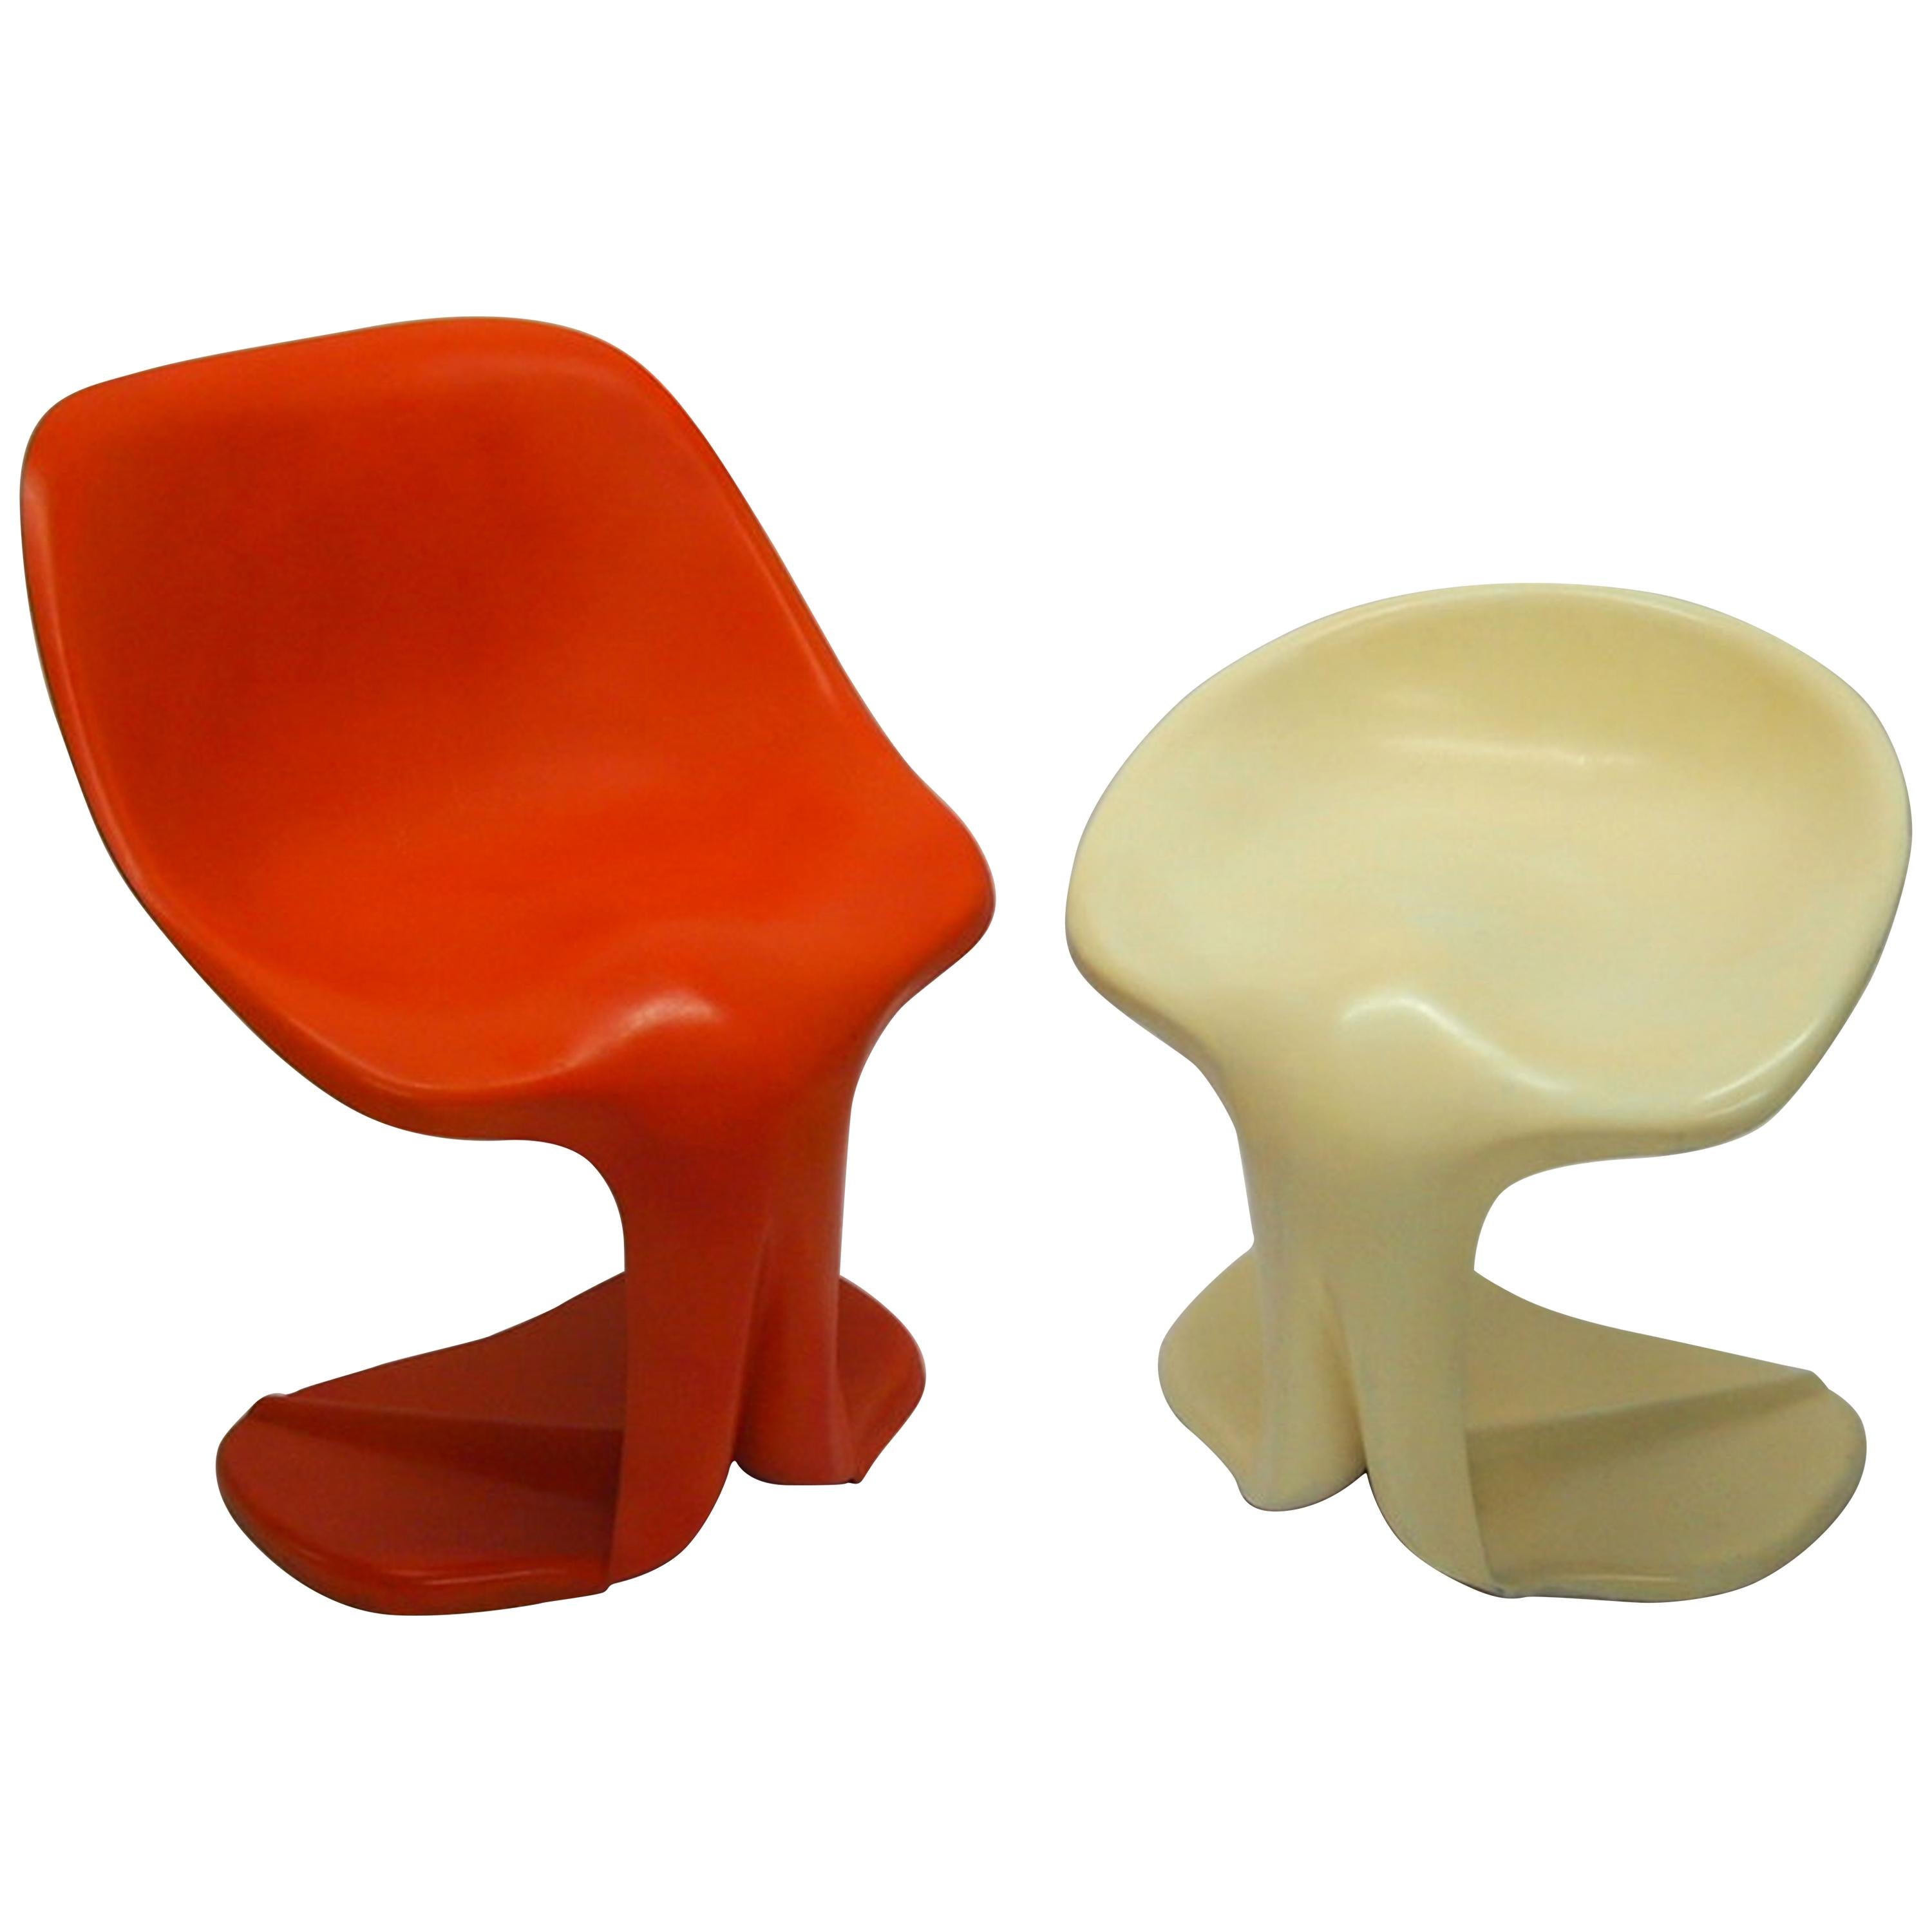 Two Sculptural Fiberglass Chairs by Jean Dudon, France, 1970